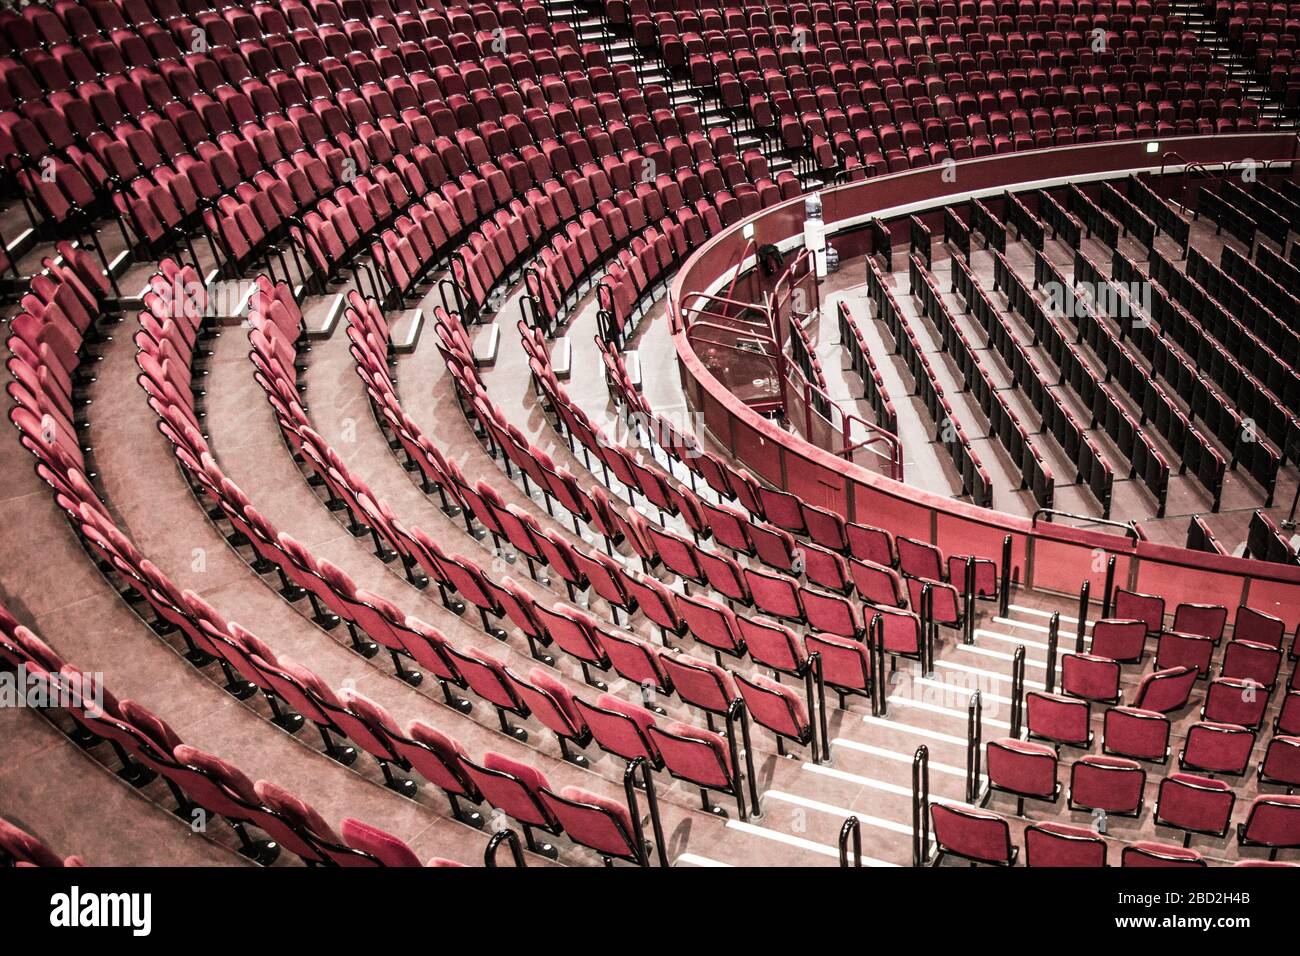 Rows of theatre seats with no people Stock Photo